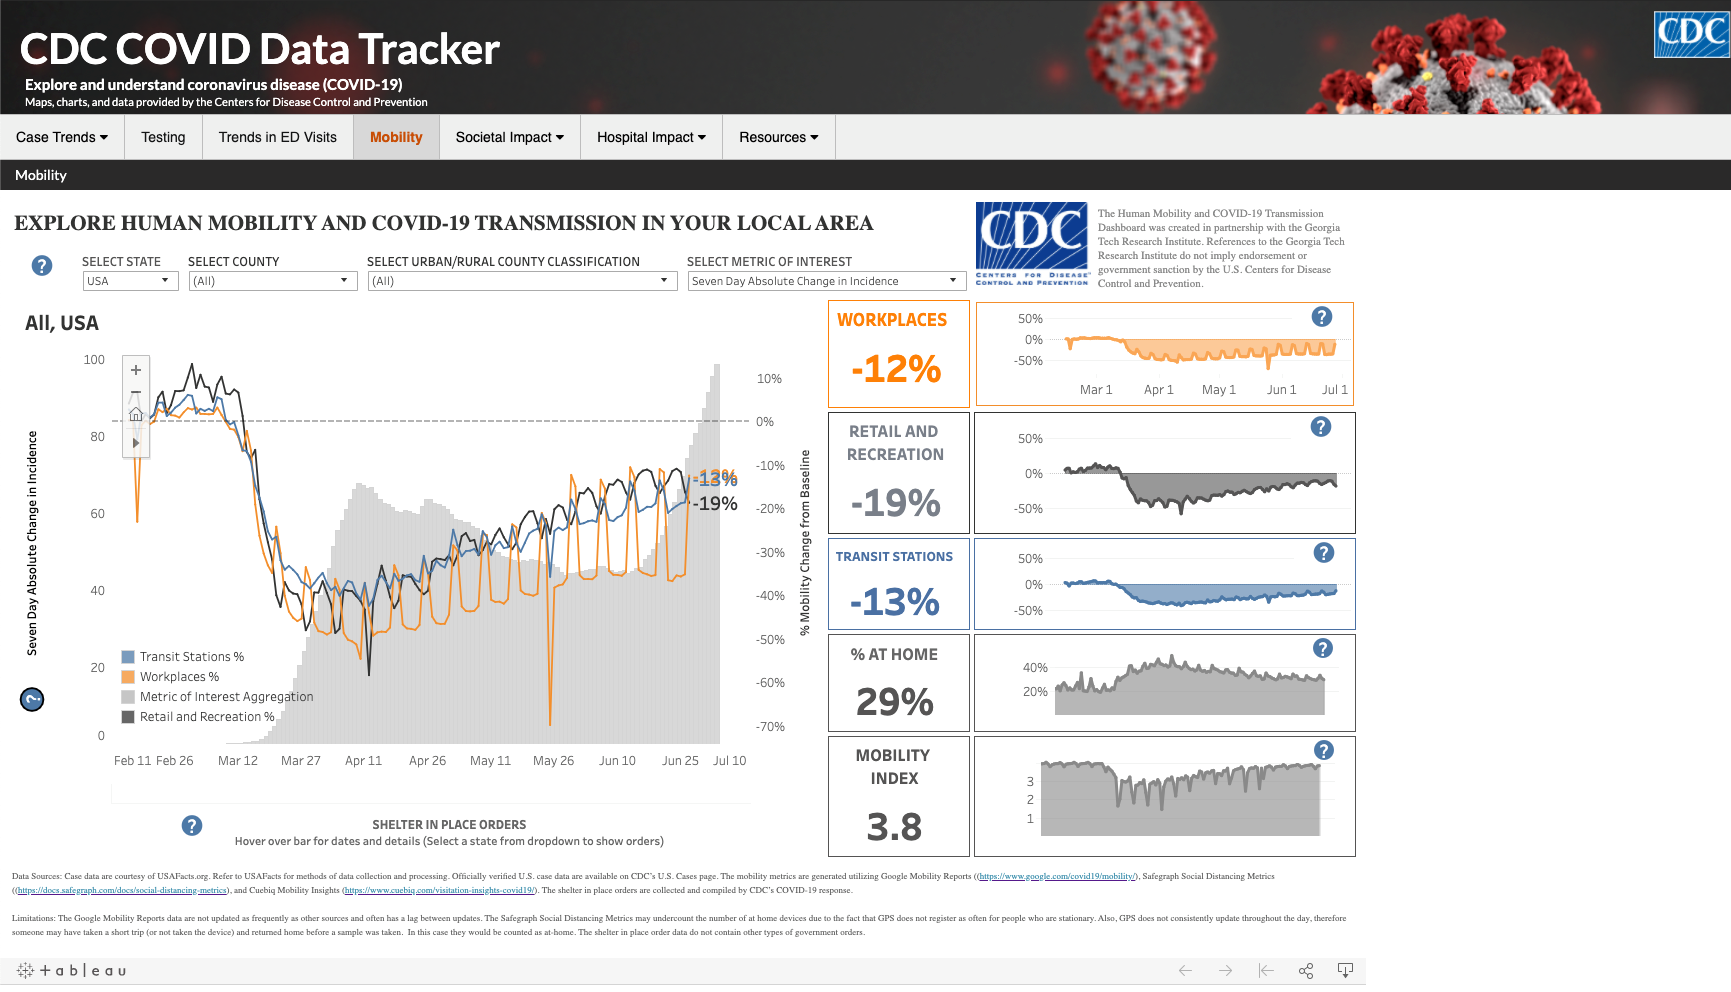 Screen capture shows a data dashboard developed for the Centers for Disease Control and Prevention by the Georgia Tech Research Institute.